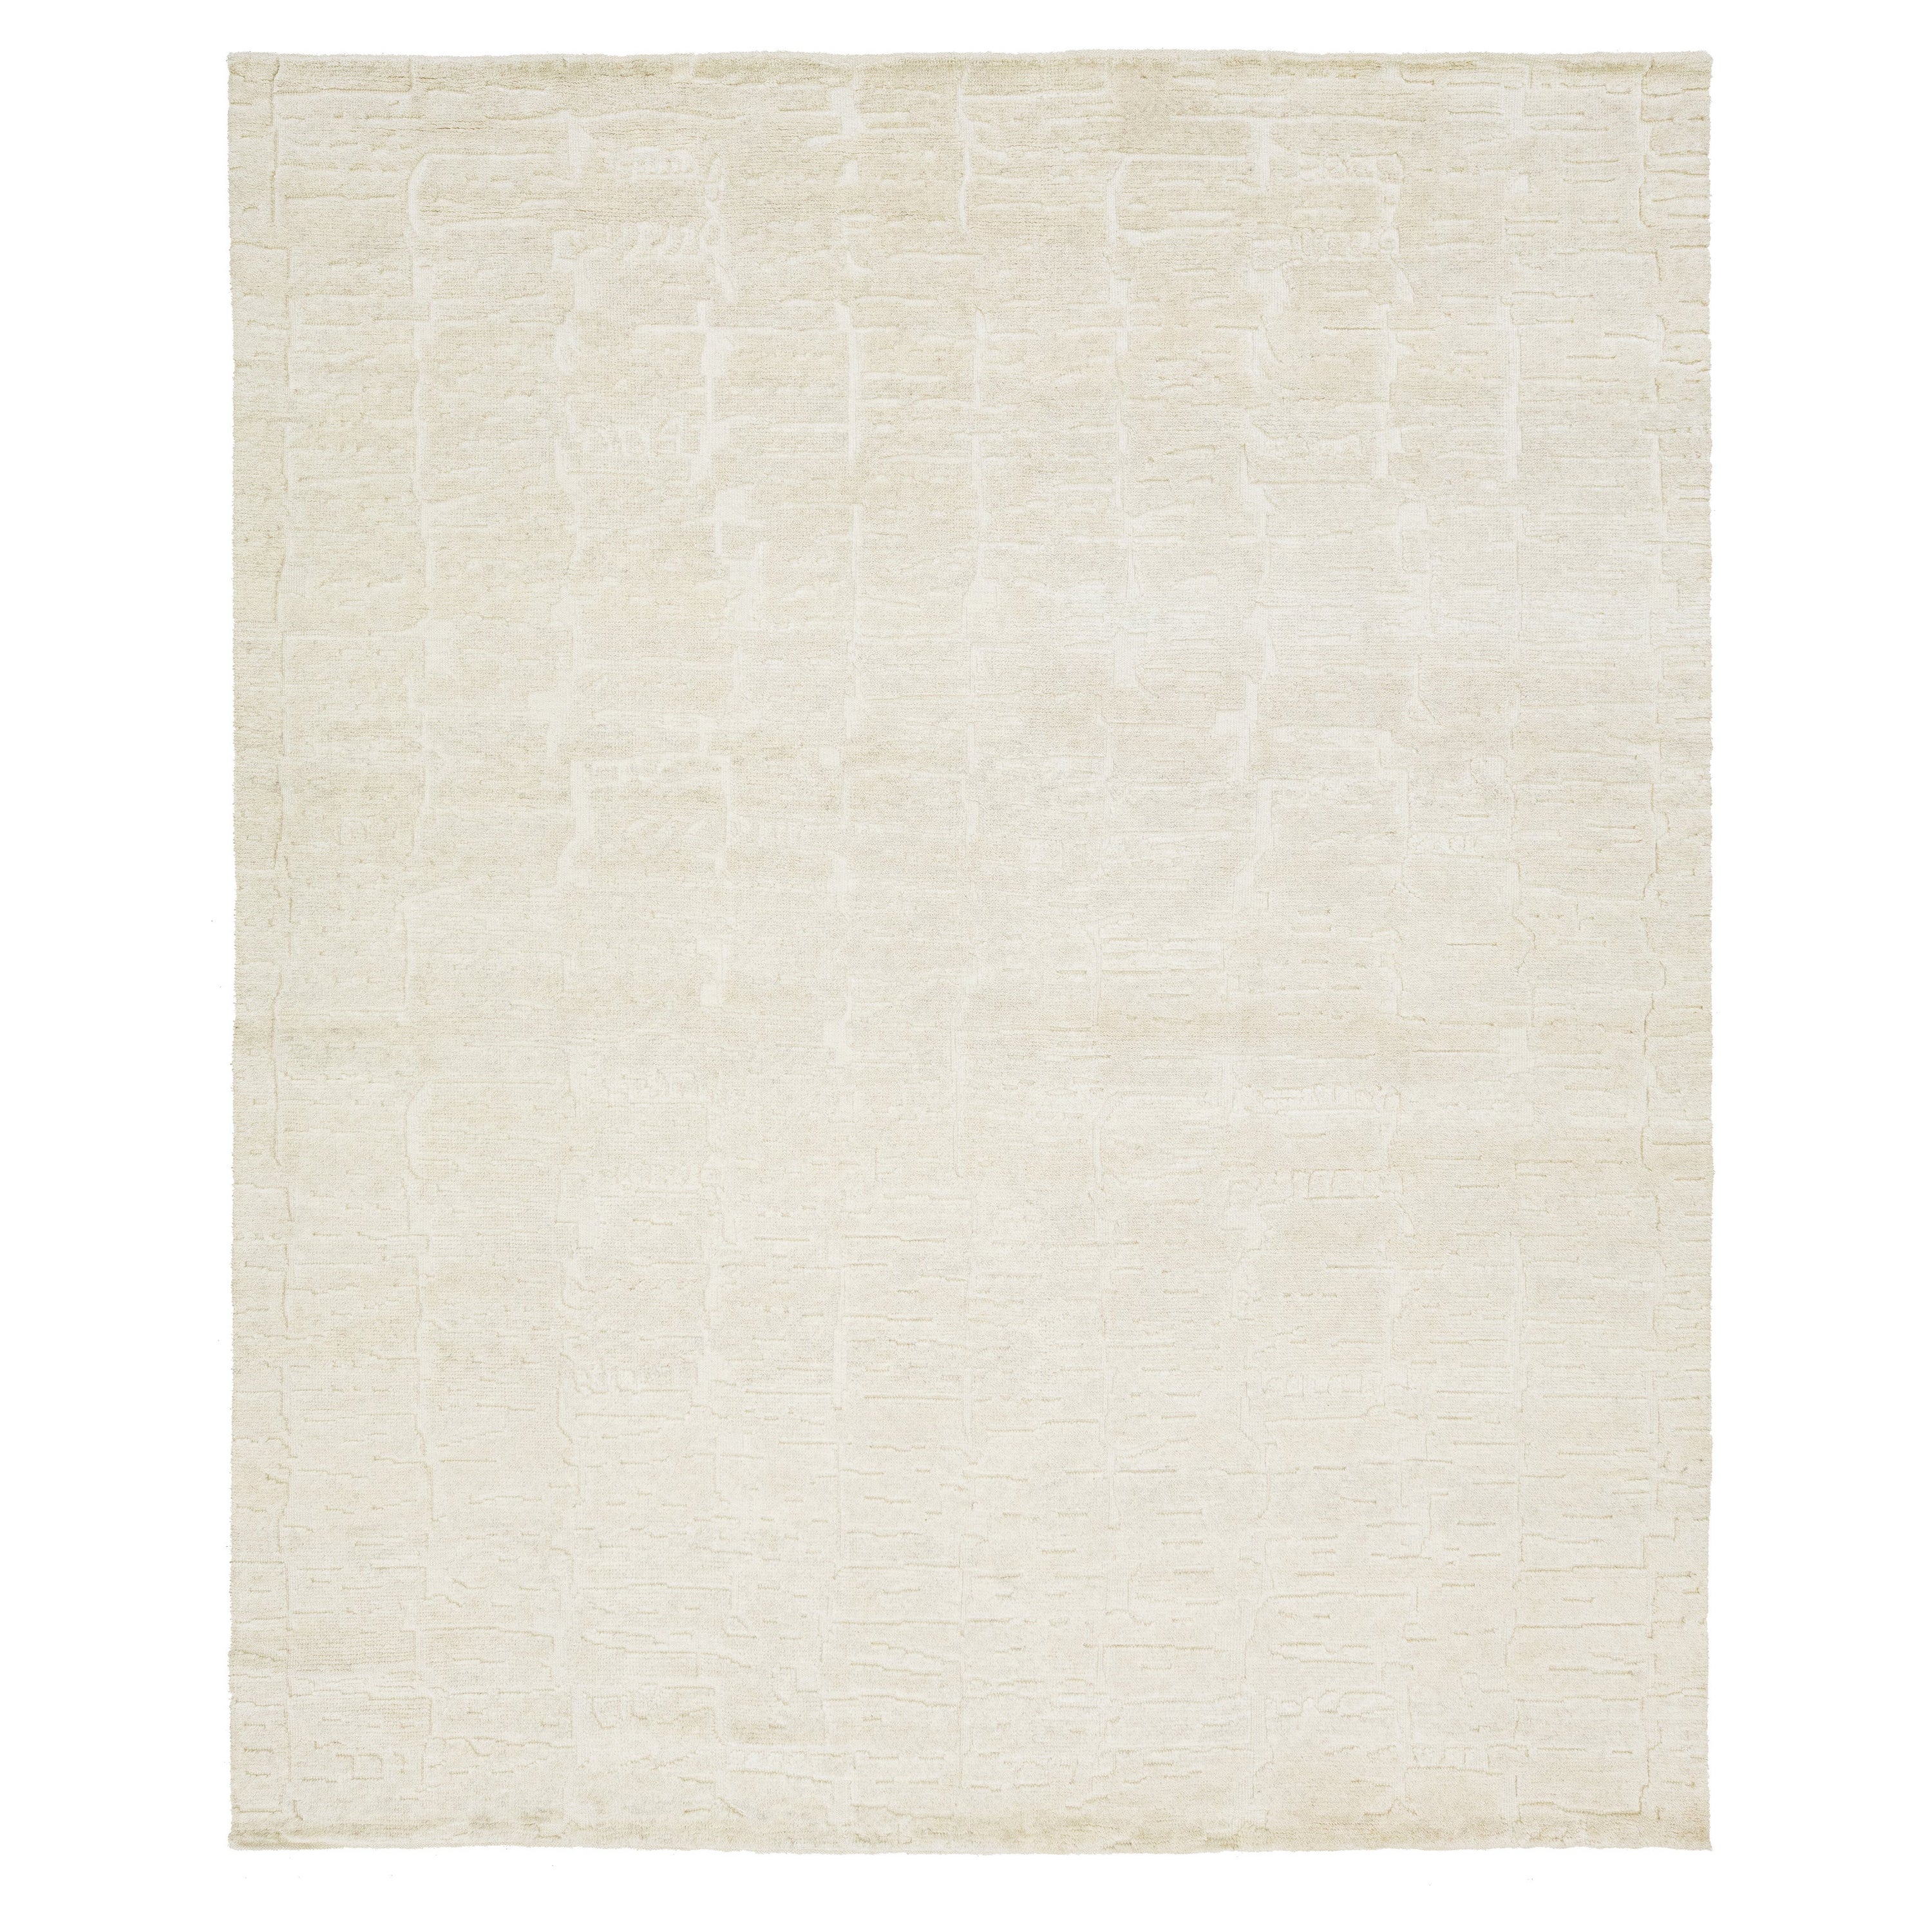 Minimalist Contemporary Moroccan Style Wool Rug In ivory by Apadana  For Sale